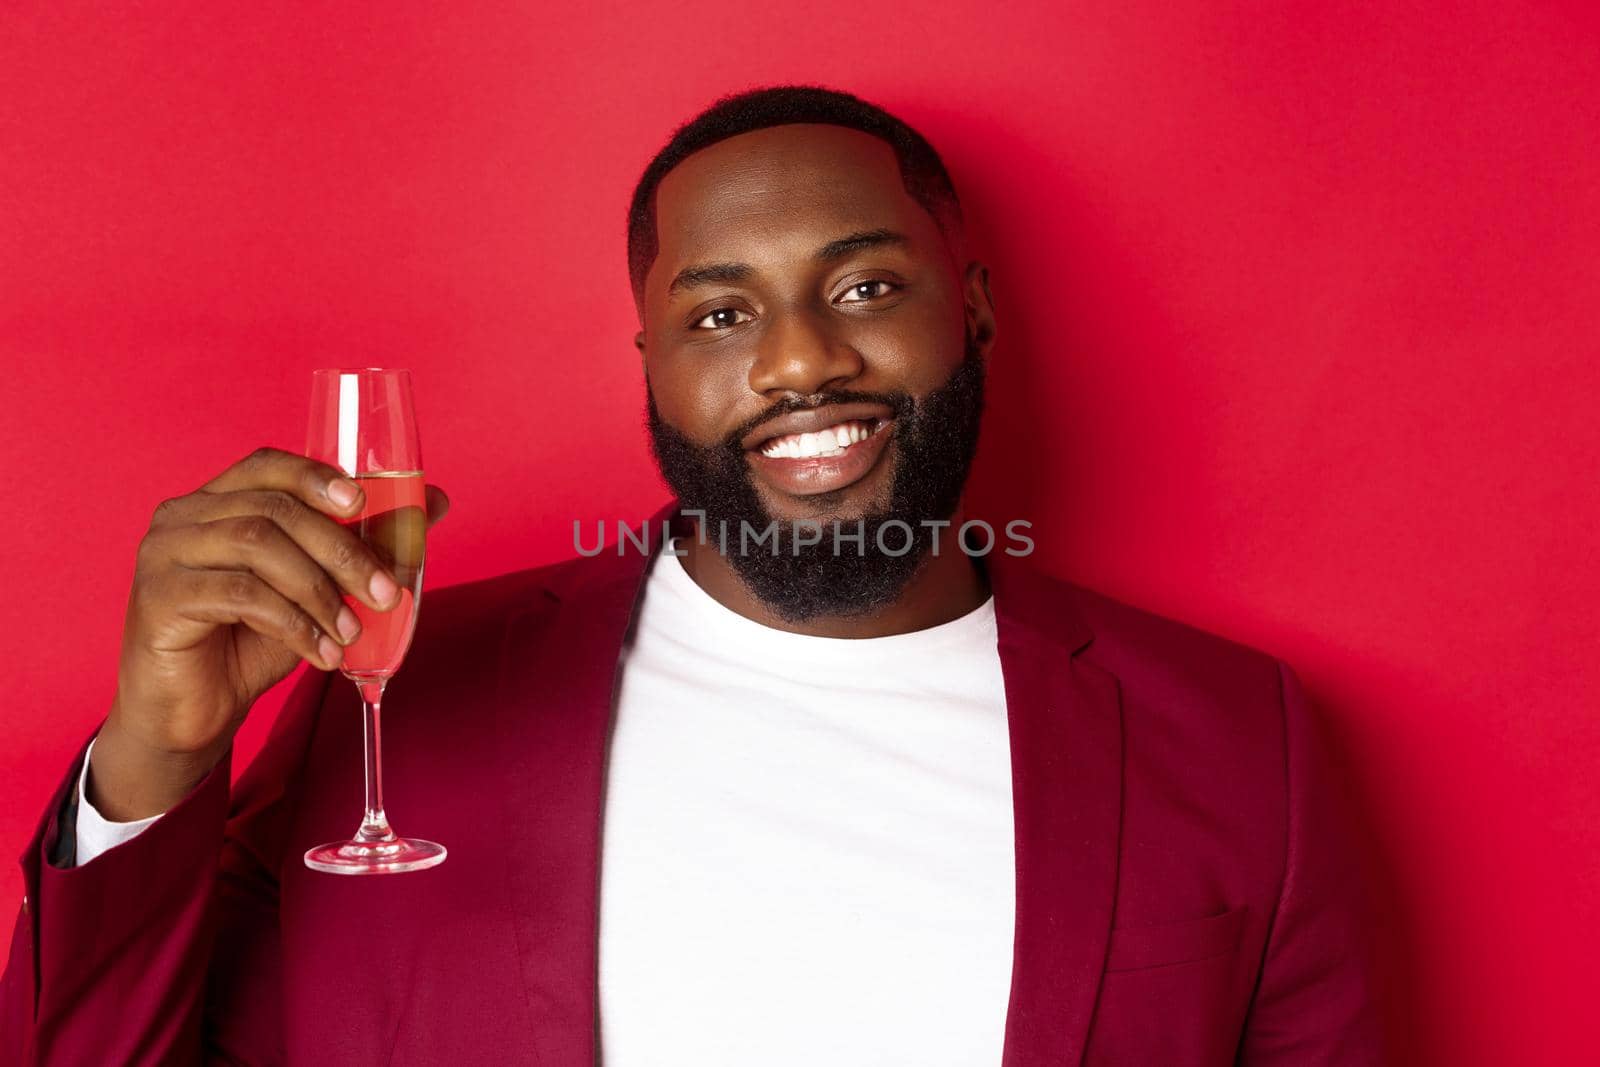 Close-up of handsome smiling Black man saying toast, raising glass of champagne for merry christmas and happy new year, celebrating against red background.